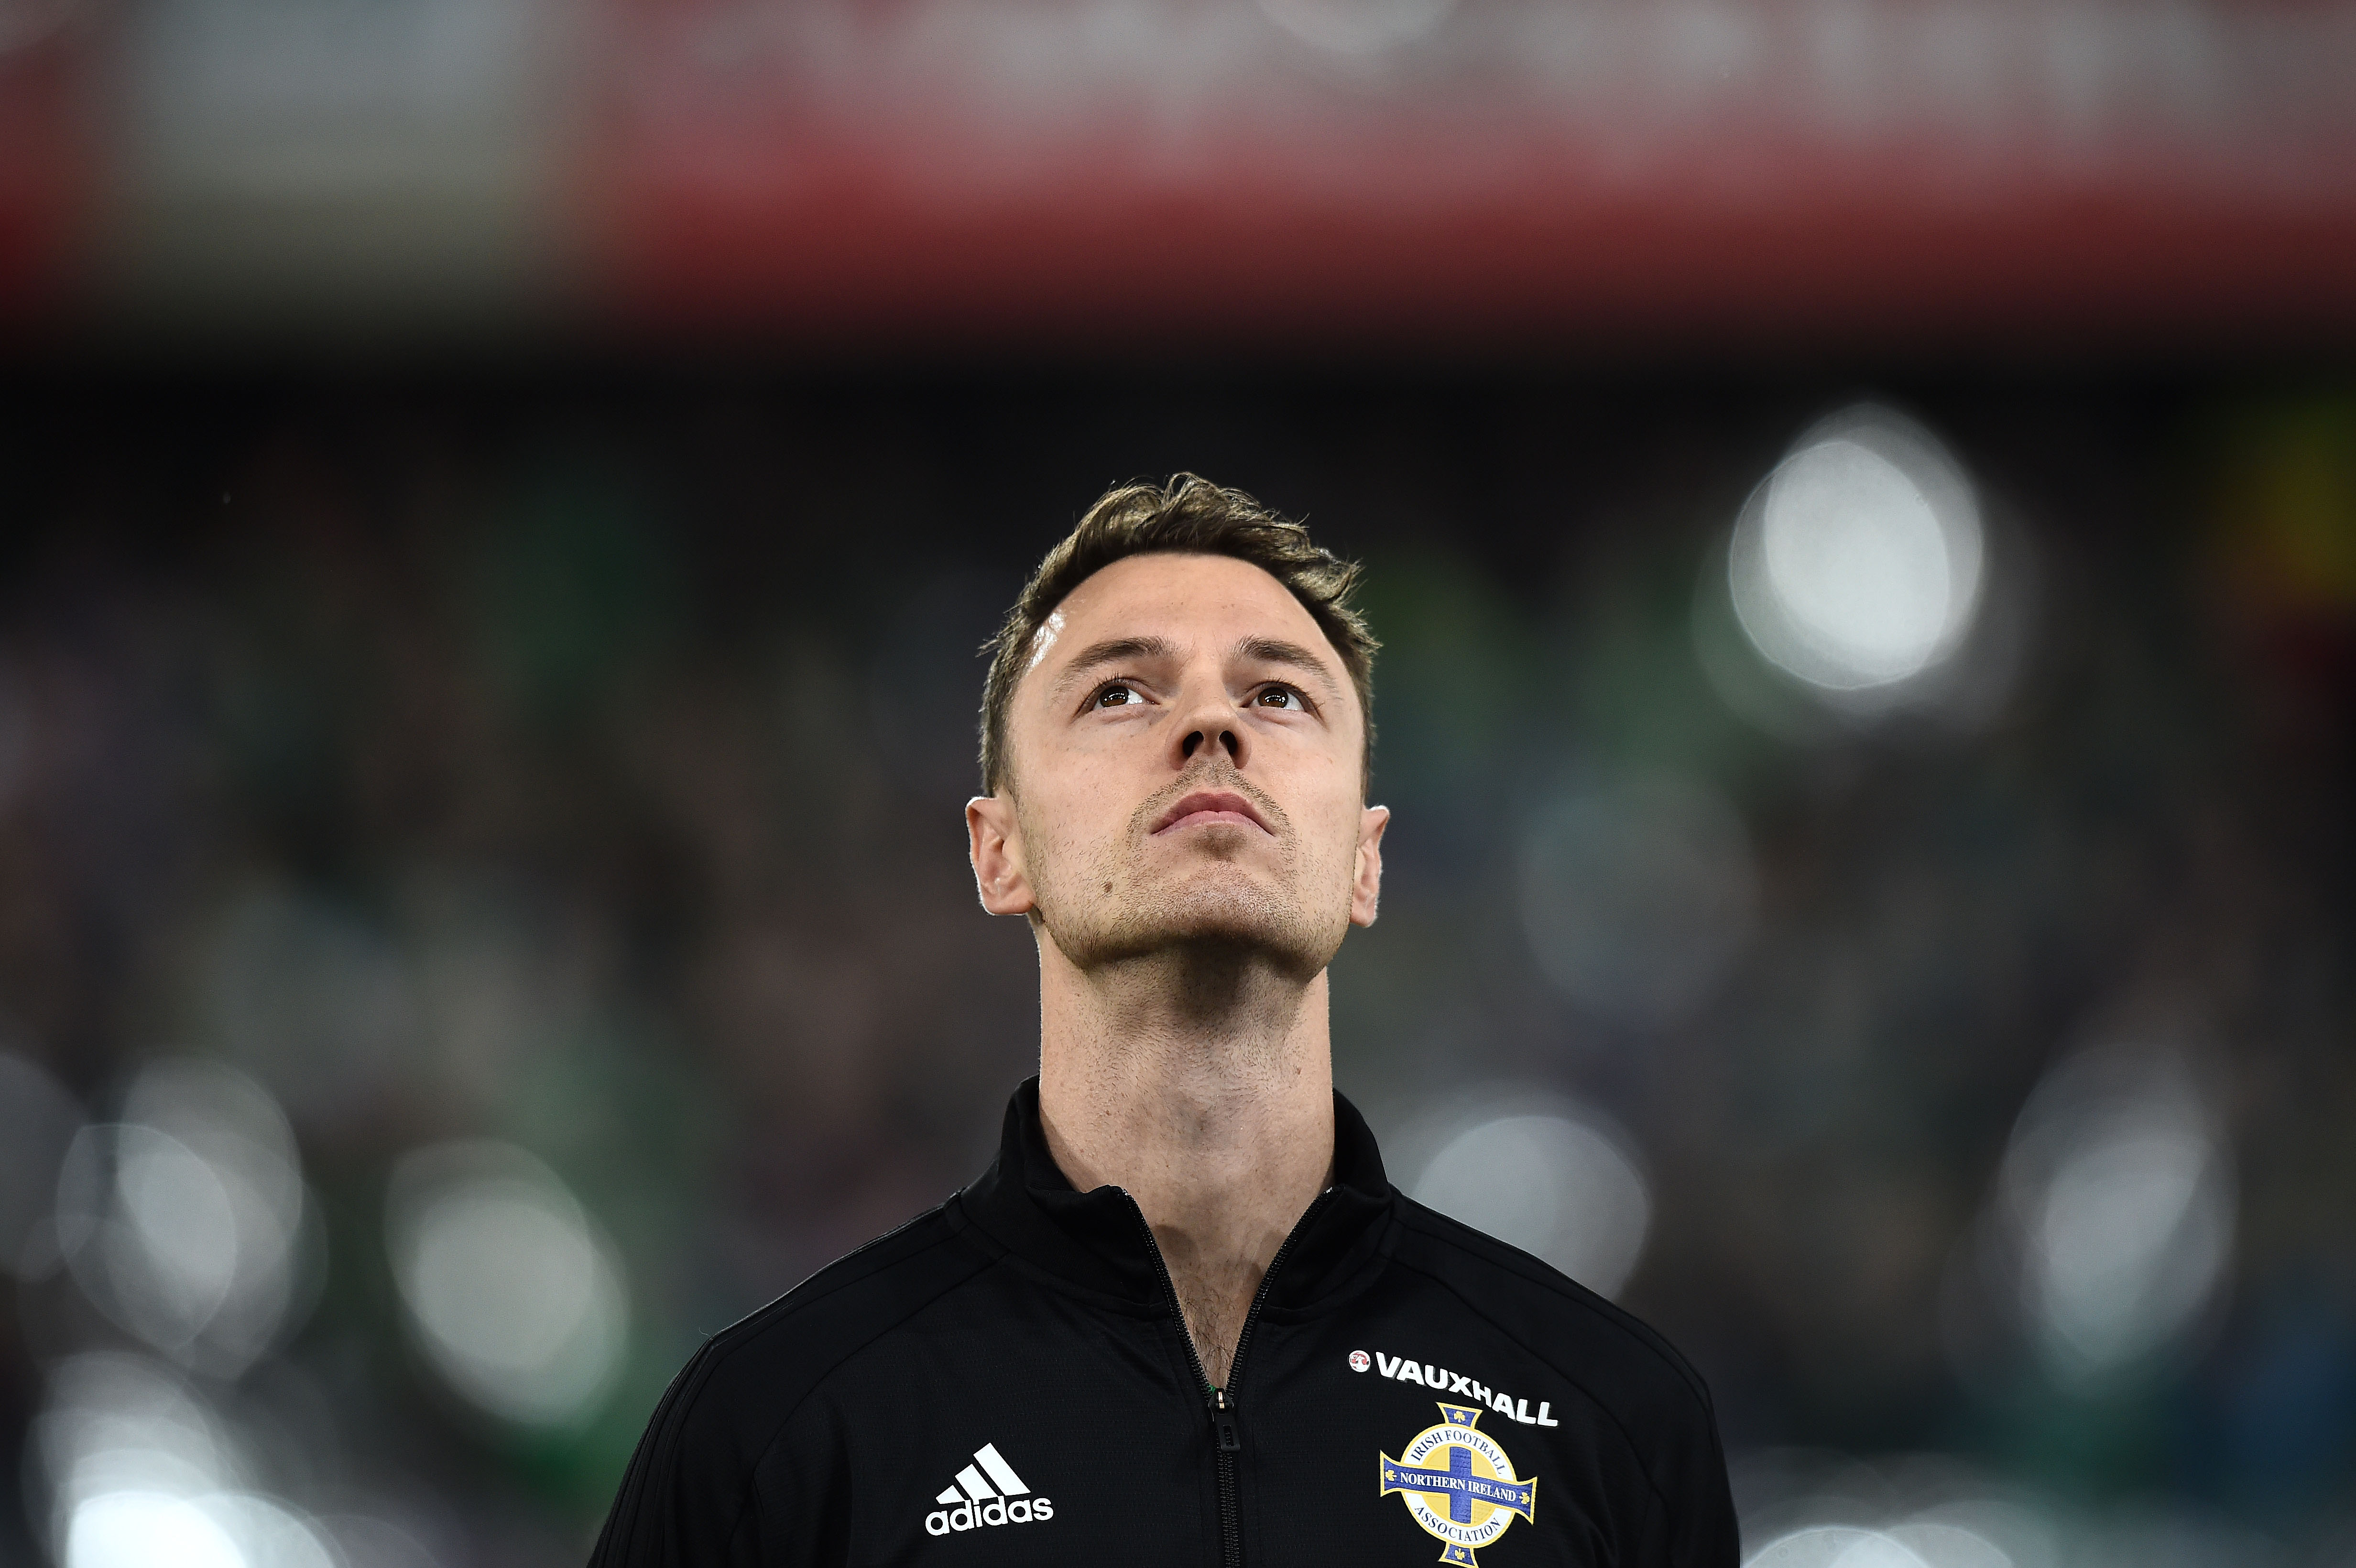 BELFAST, NORTHERN IRELAND - NOVEMBER 09: Jonny Evans of Northern Ireland during the FIFA 2018 World Cup Qualifier Play-Off first leg between Northern Ireland and Switzerland at Windsor Park on November 9, 2017 in Belfast, Northern Ireland. (Photo by Charles McQuillan/Getty Images)